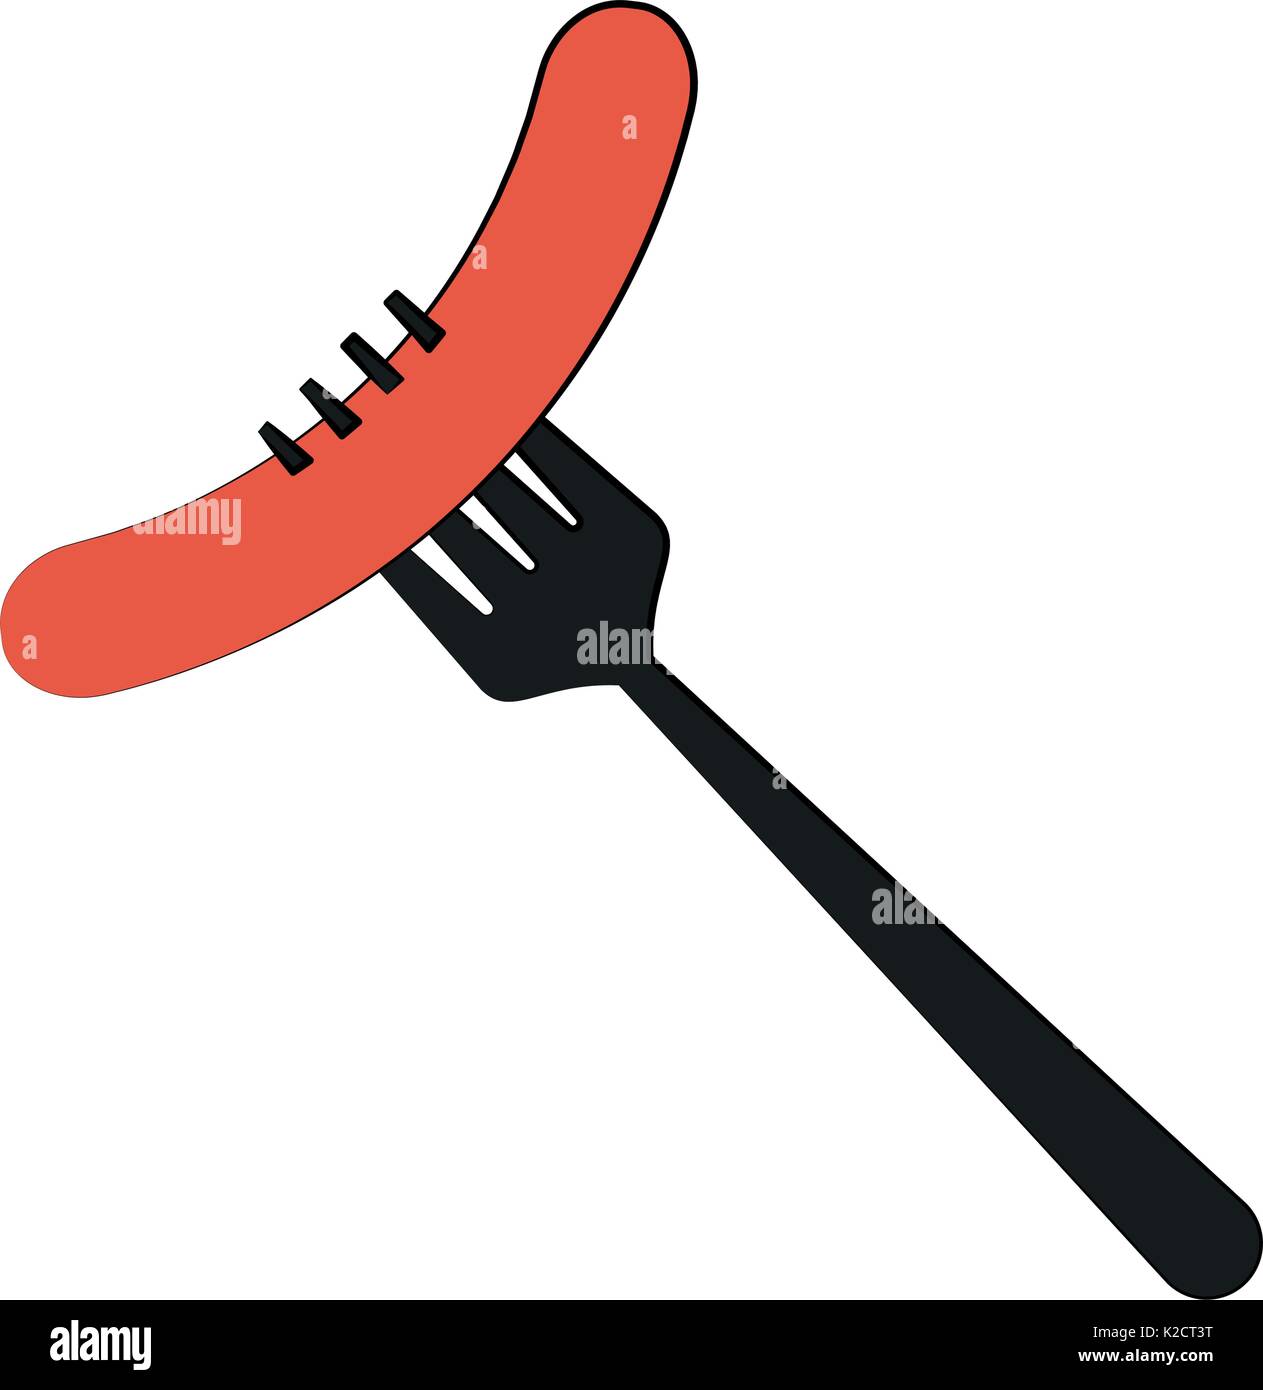 sausage on fork icon image  Stock Vector